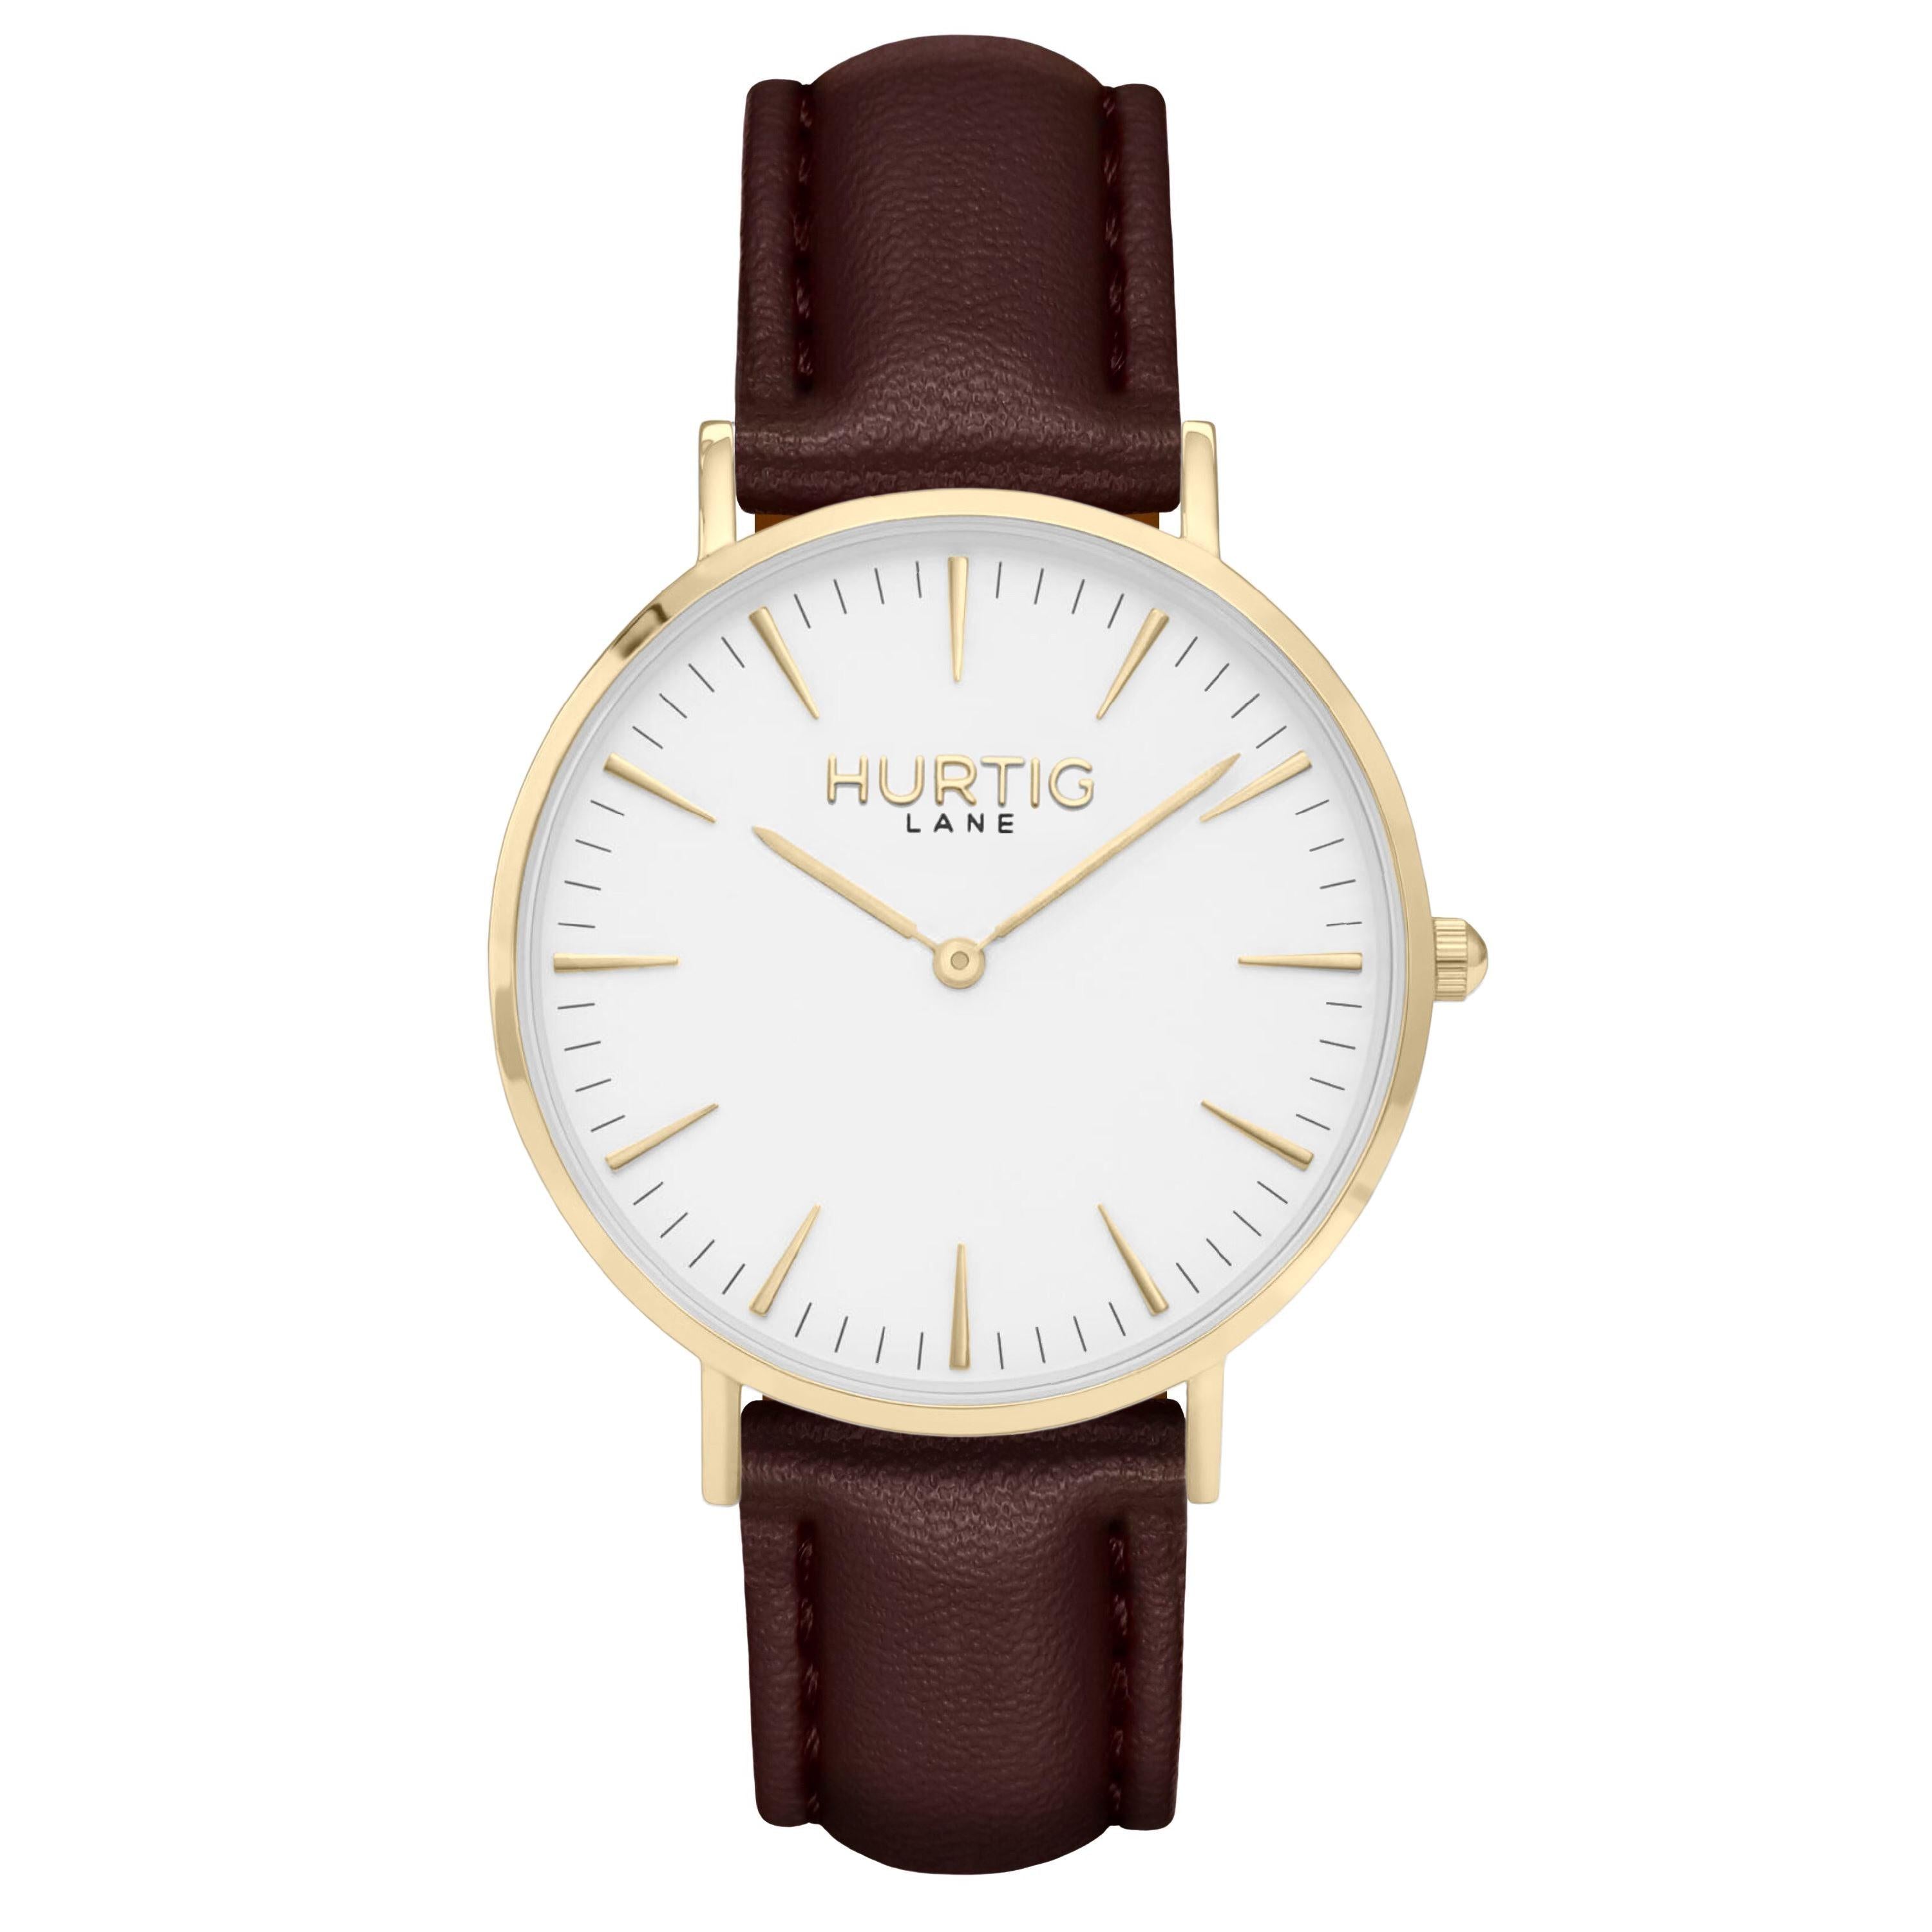 Vegan wristwatch in Gold with White dial